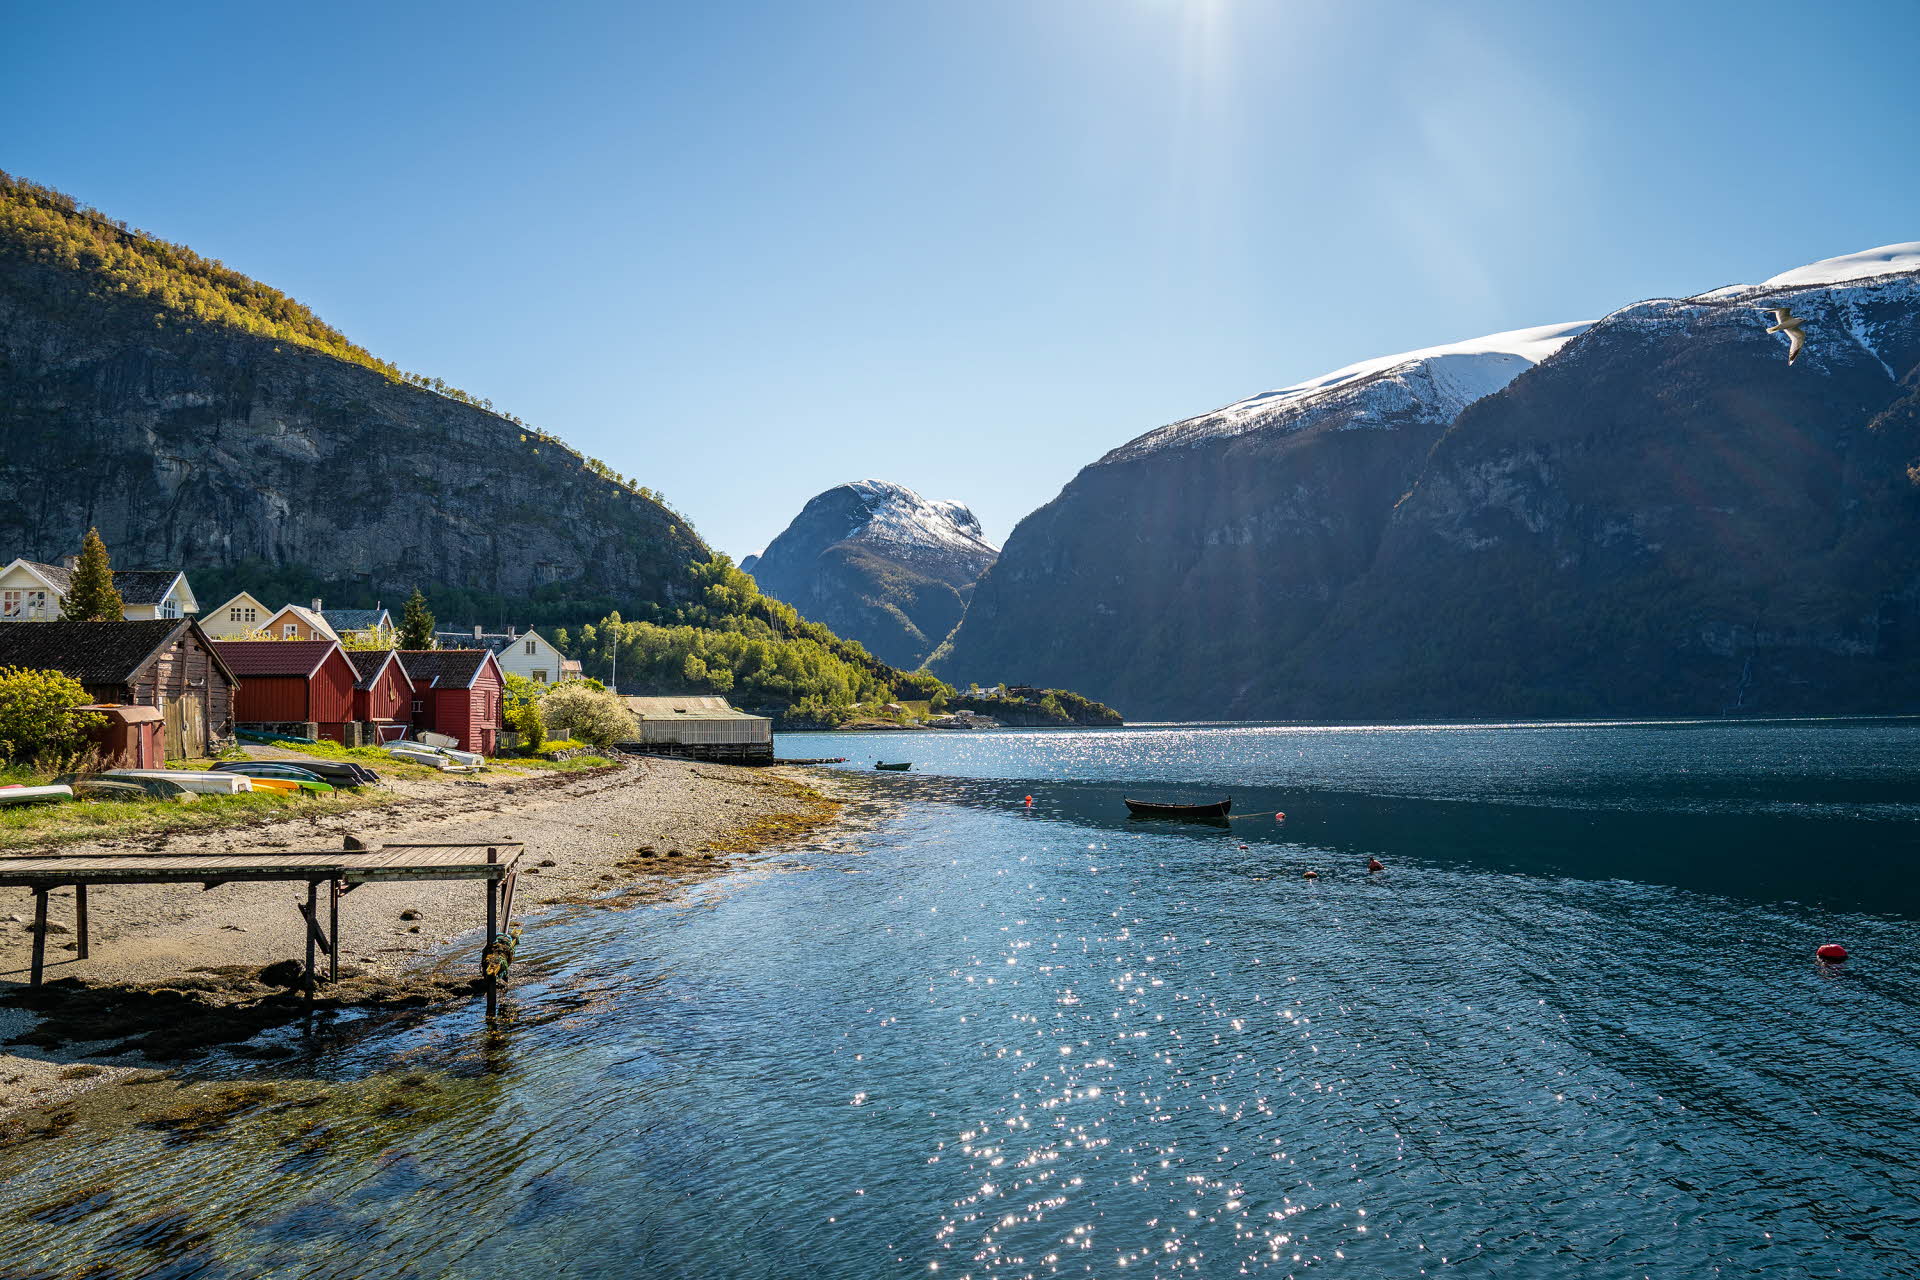 A boathouse on the shoreline at the UNESCO-listed Aurlandsfjord in summer. Fertile mountainsides with snow-capped peaks